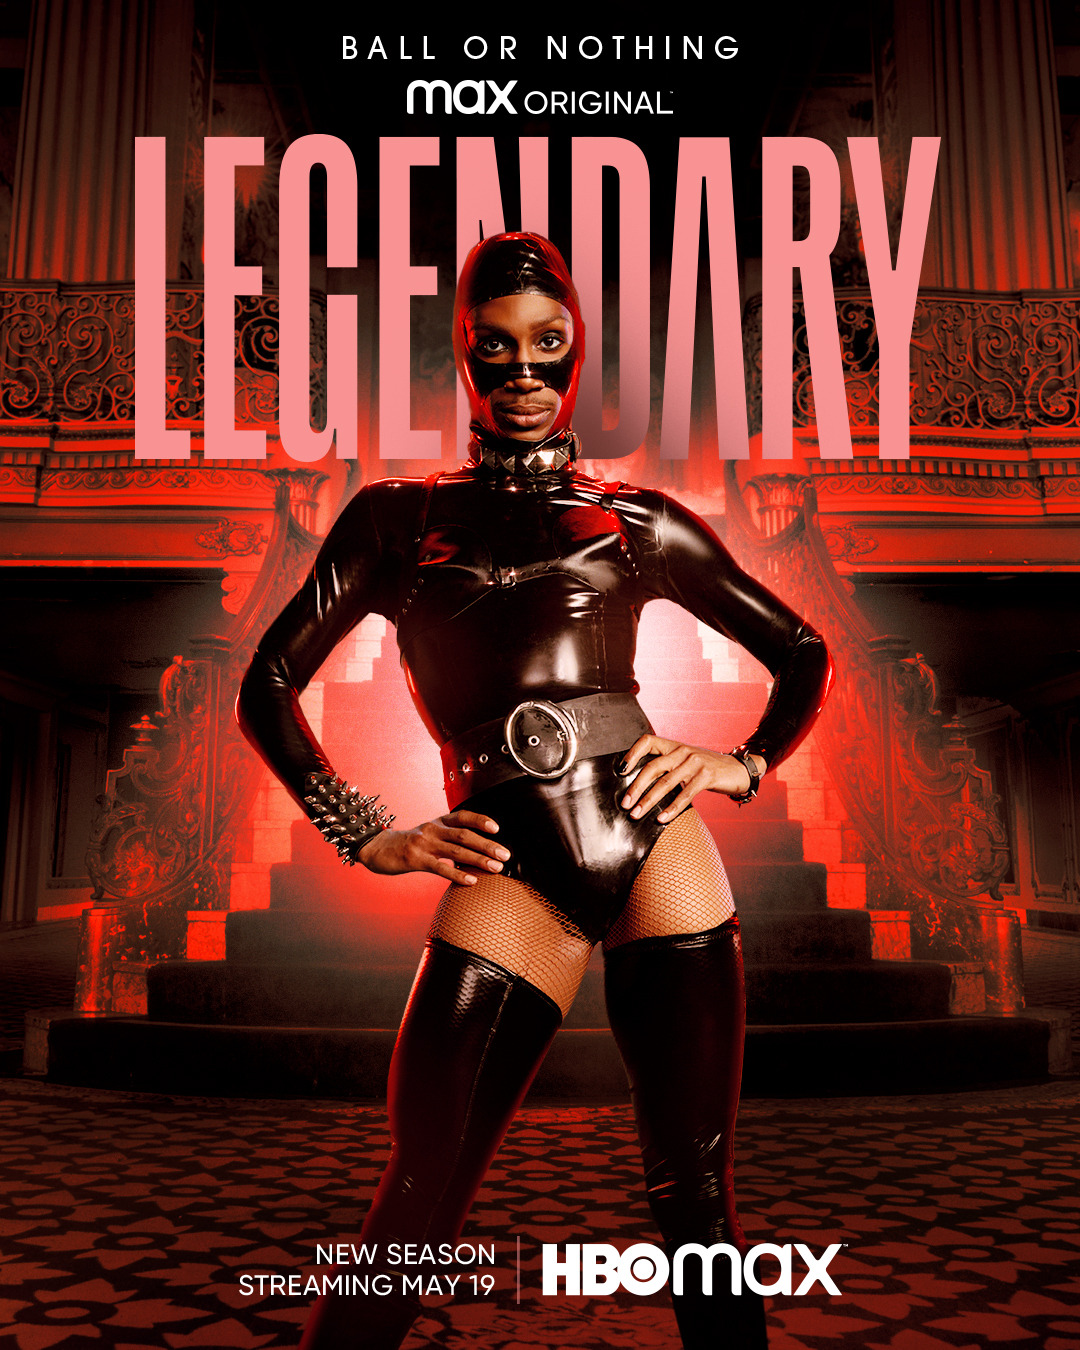 Extra Large TV Poster Image for Legendary (#166 of 173)